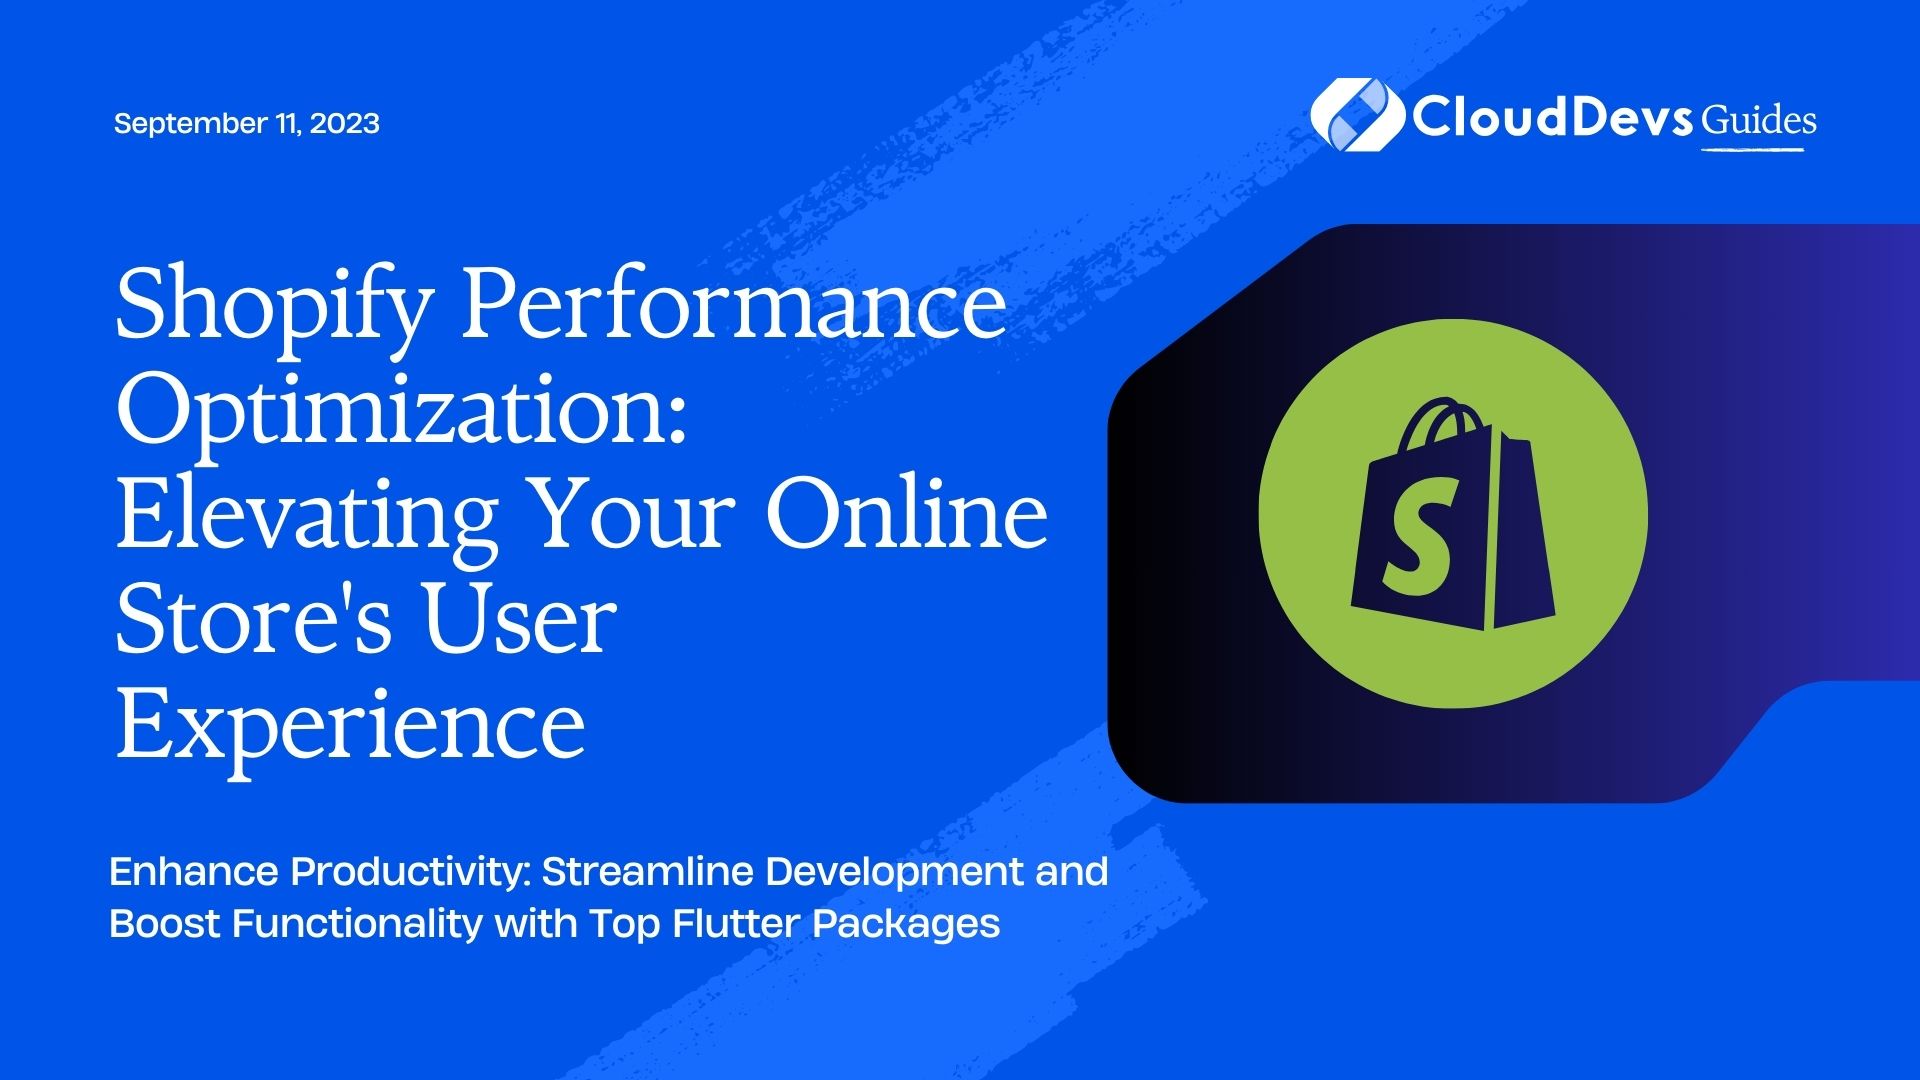 Shopify Performance Optimization: Elevating Your Online Store's User Experience